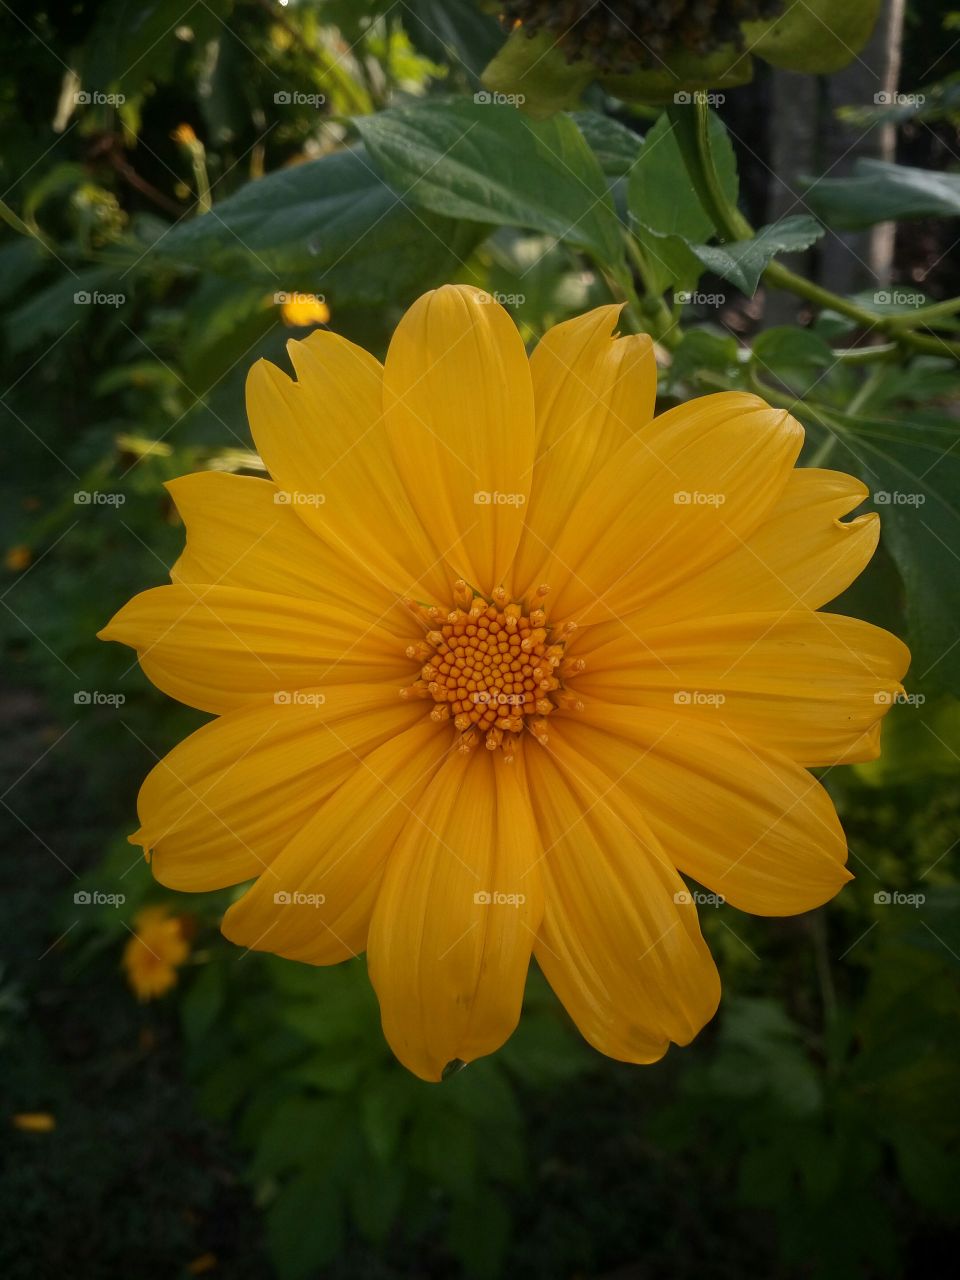 the most beautiful blooming yellow colour flower in my garden